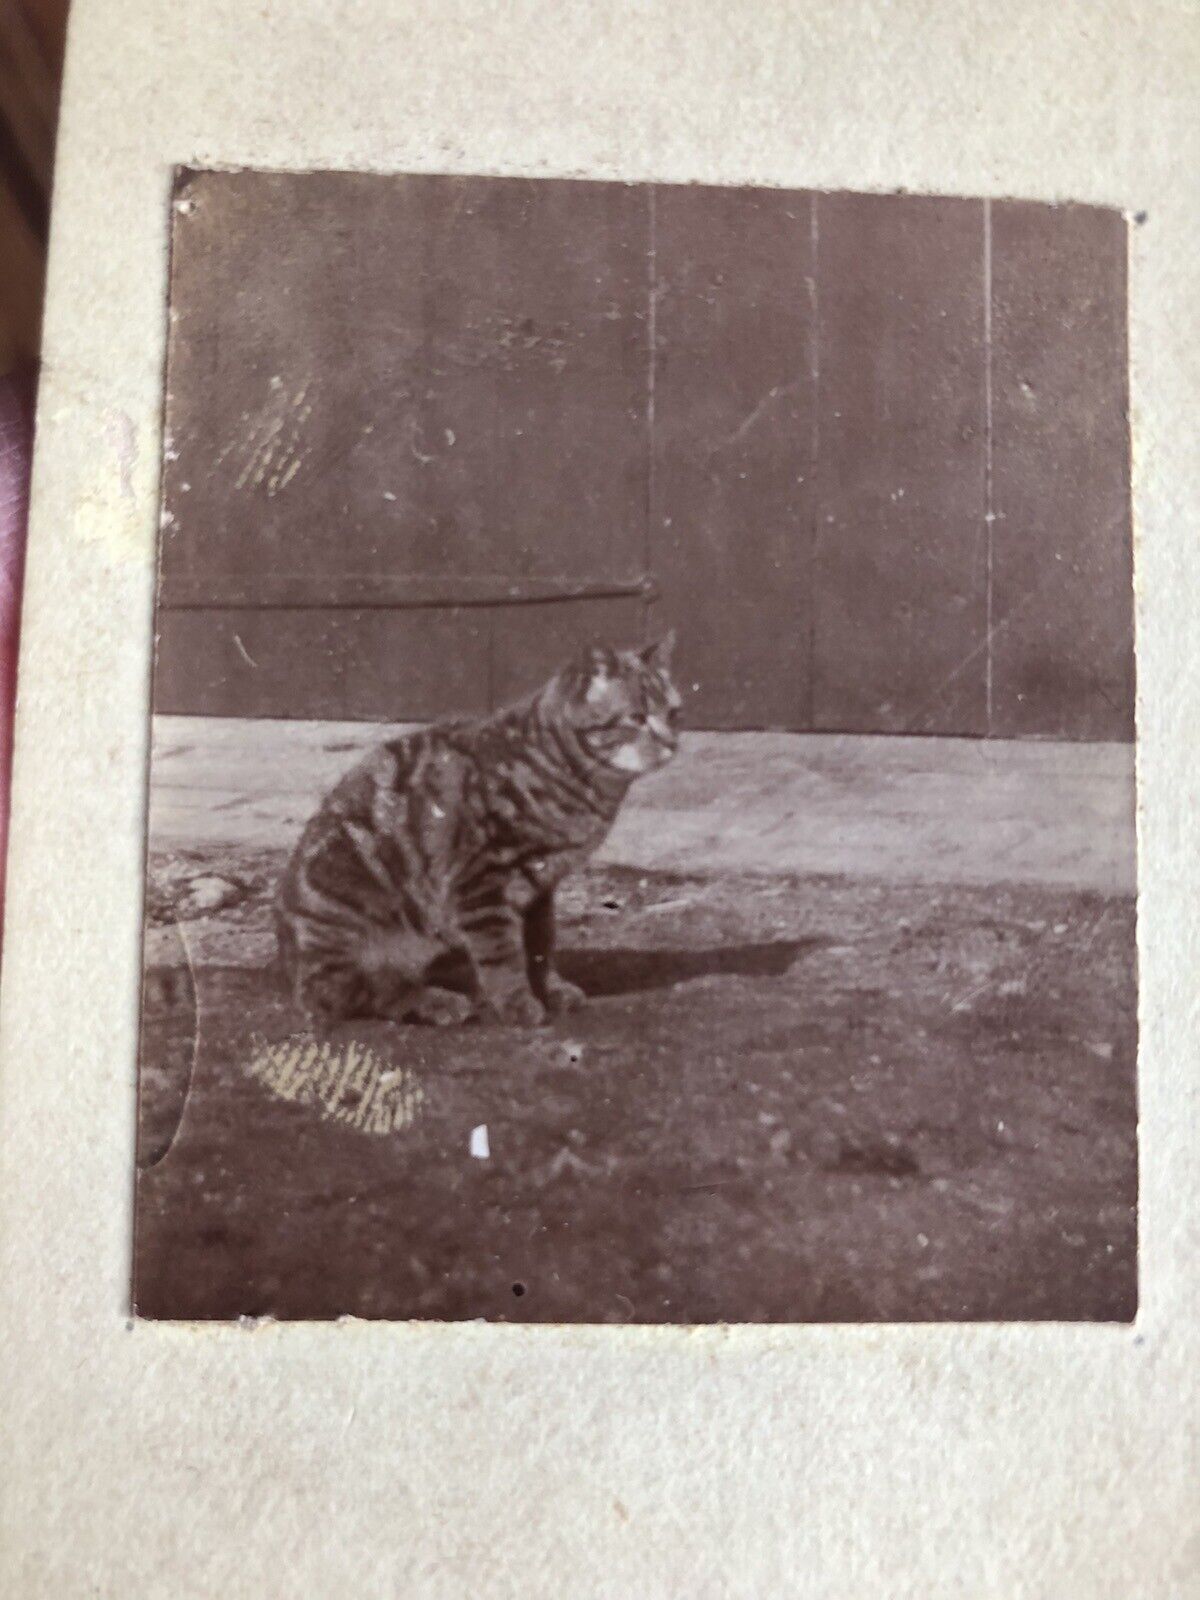 Antique Cat Photo Sepia Photo On Board Striped Kitty Outdoors Early 1900s